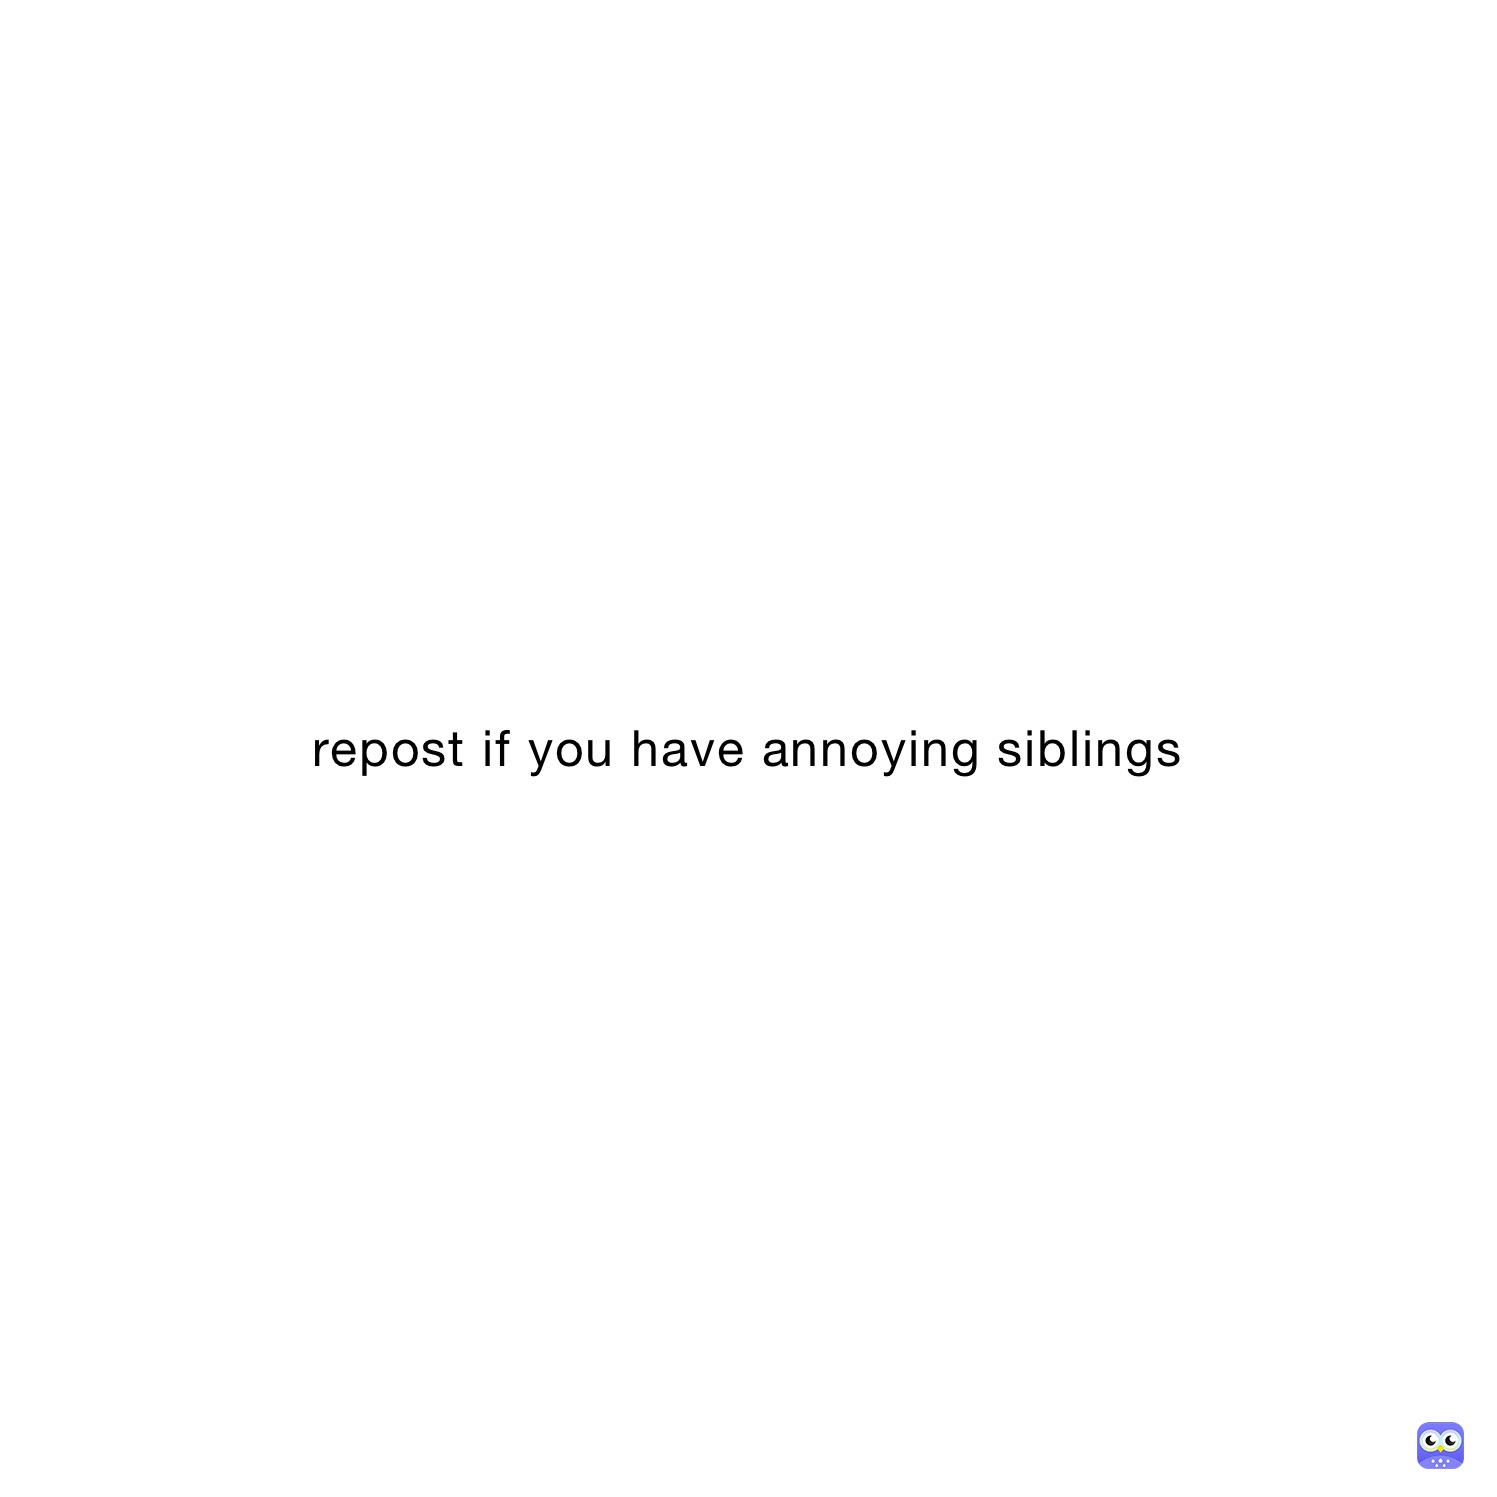 repost if you have annoying siblings